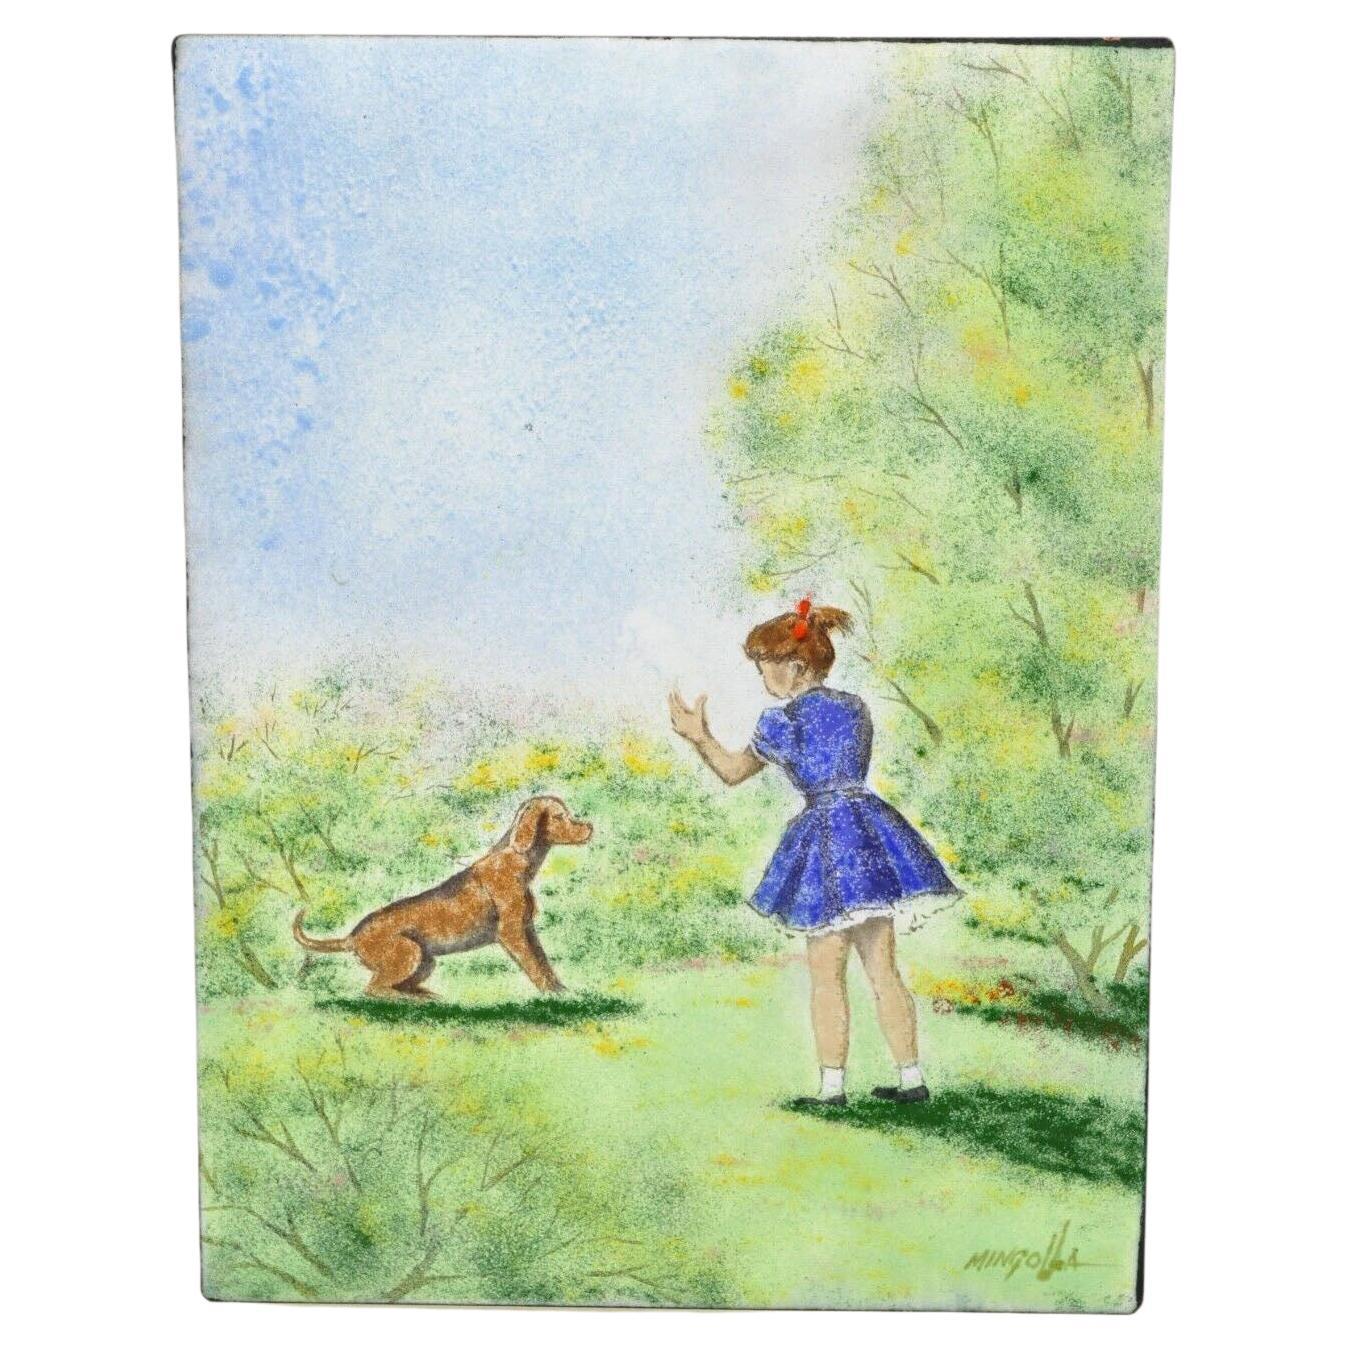 Dom Dominic Mingolla Enamel on Copper Painting Girl with Dog in Field 12 x 9 For Sale